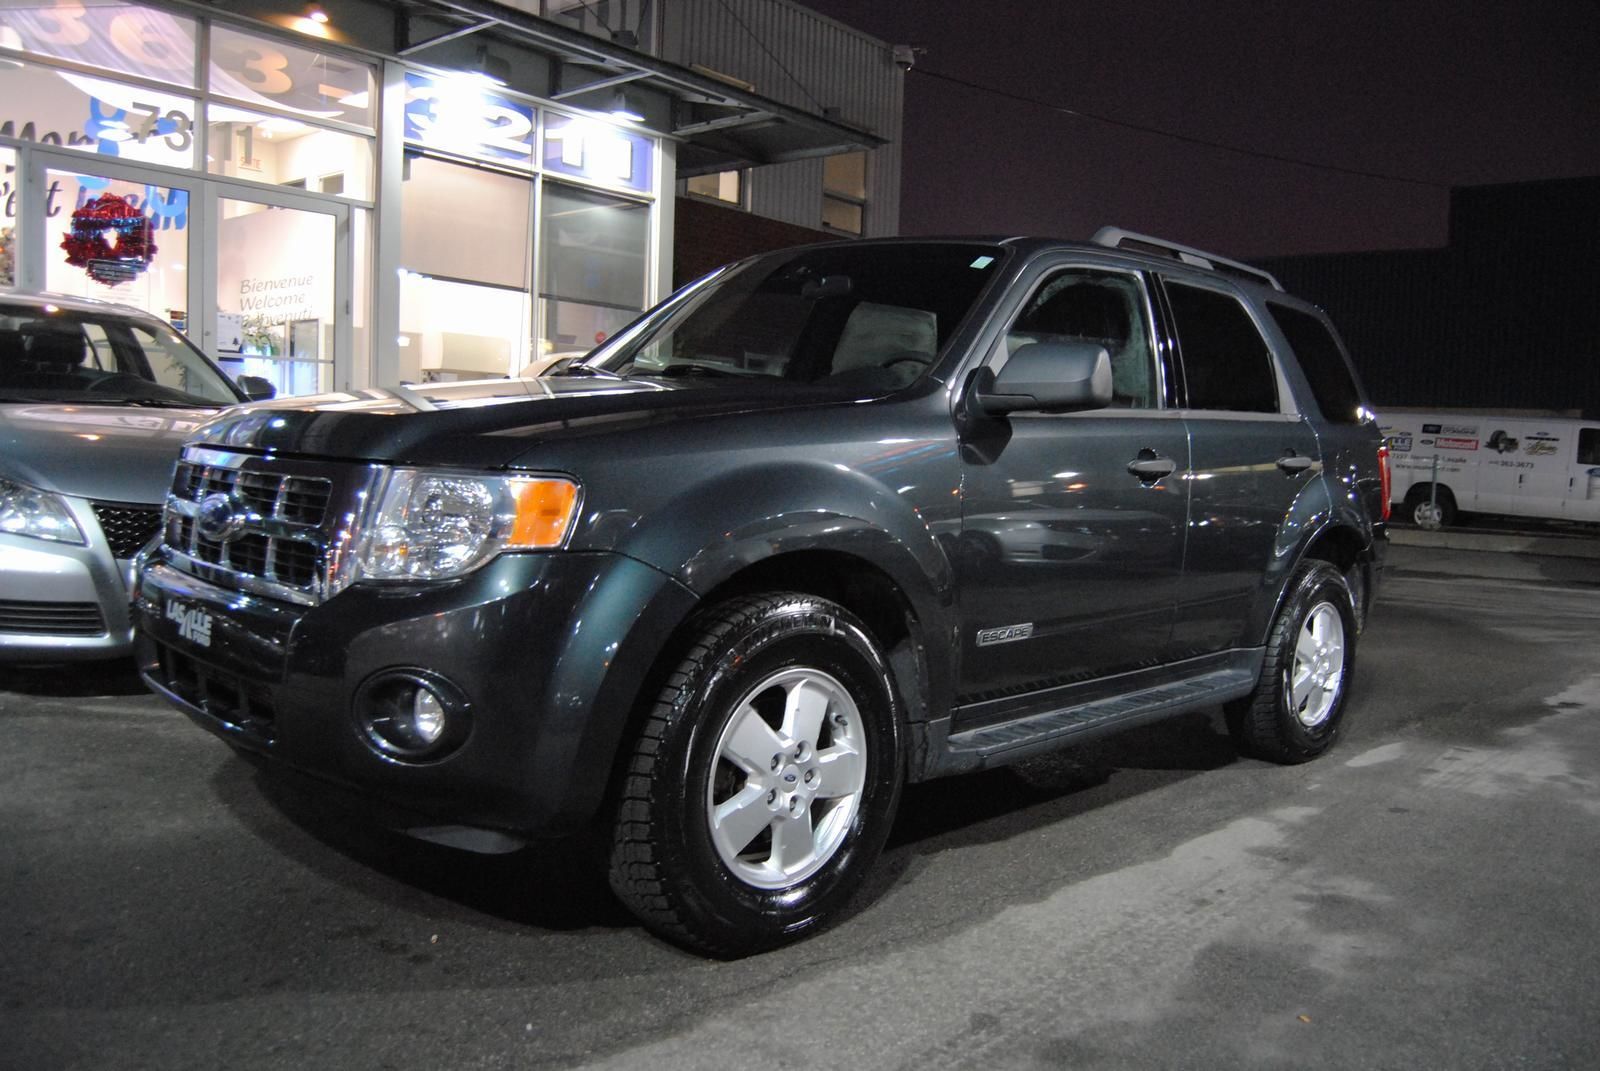 Buy used ford escape montreal #8